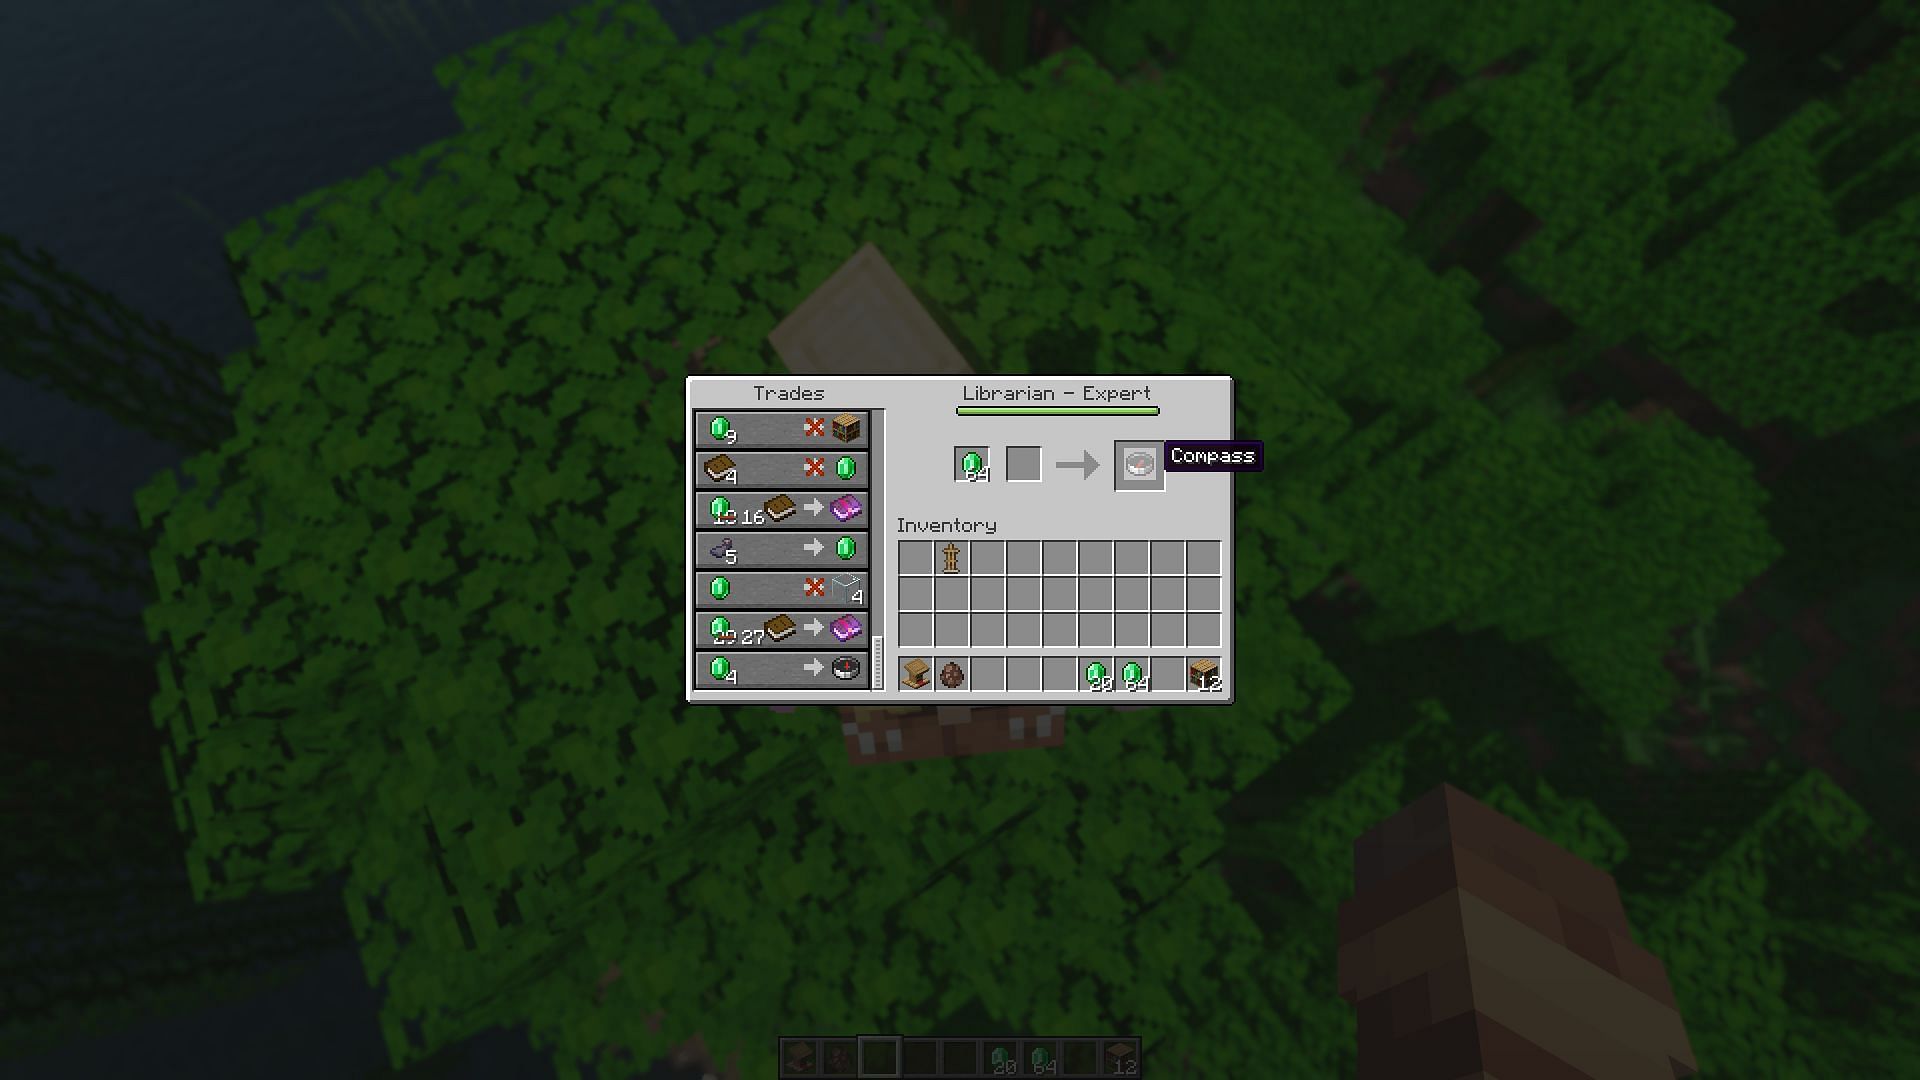 how to craft a compass in minecraft